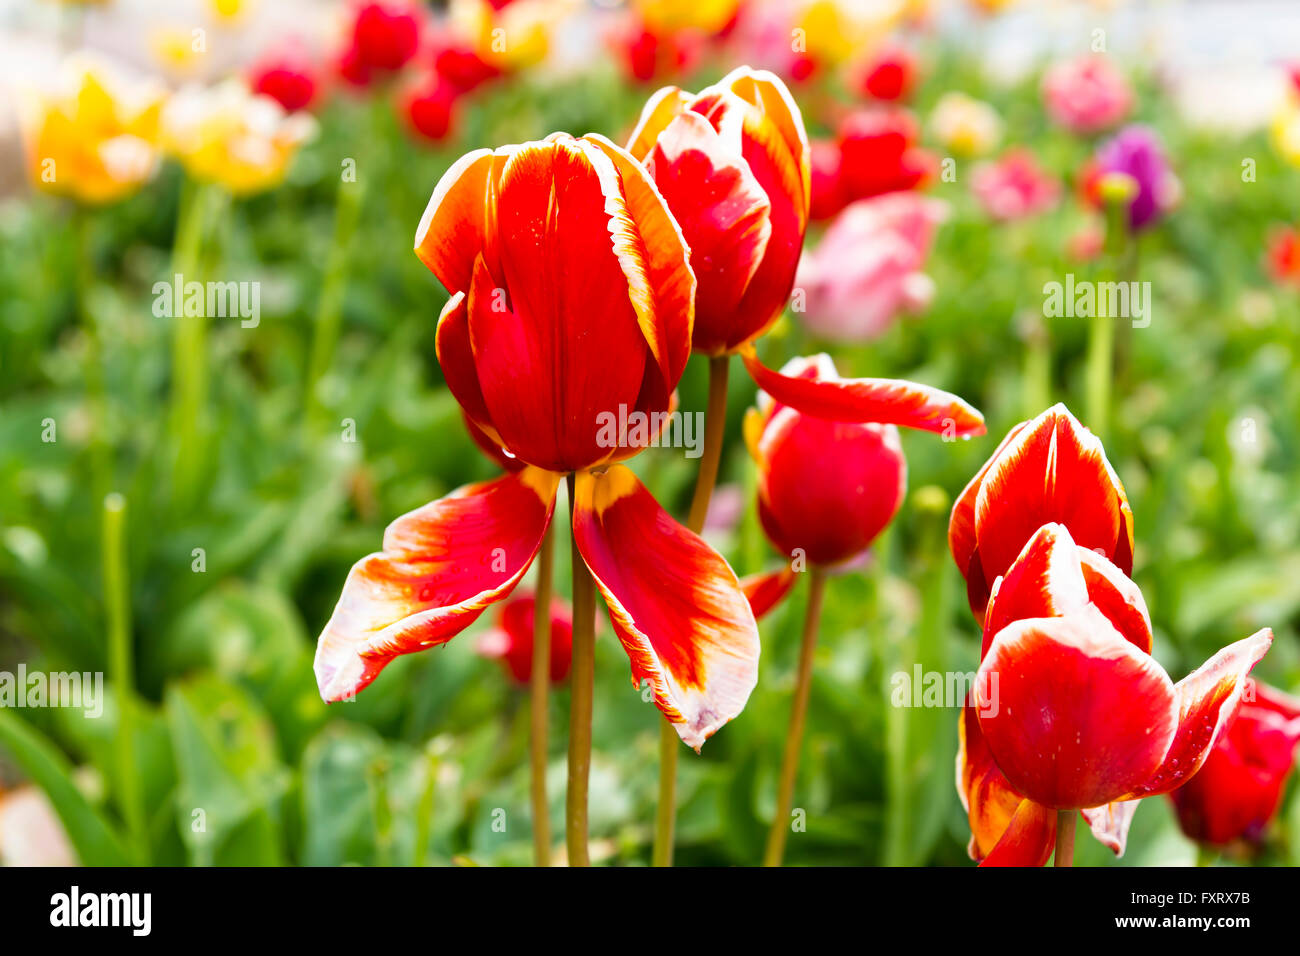 Red Tulips In Foreground Green Plants Background Stock Photo